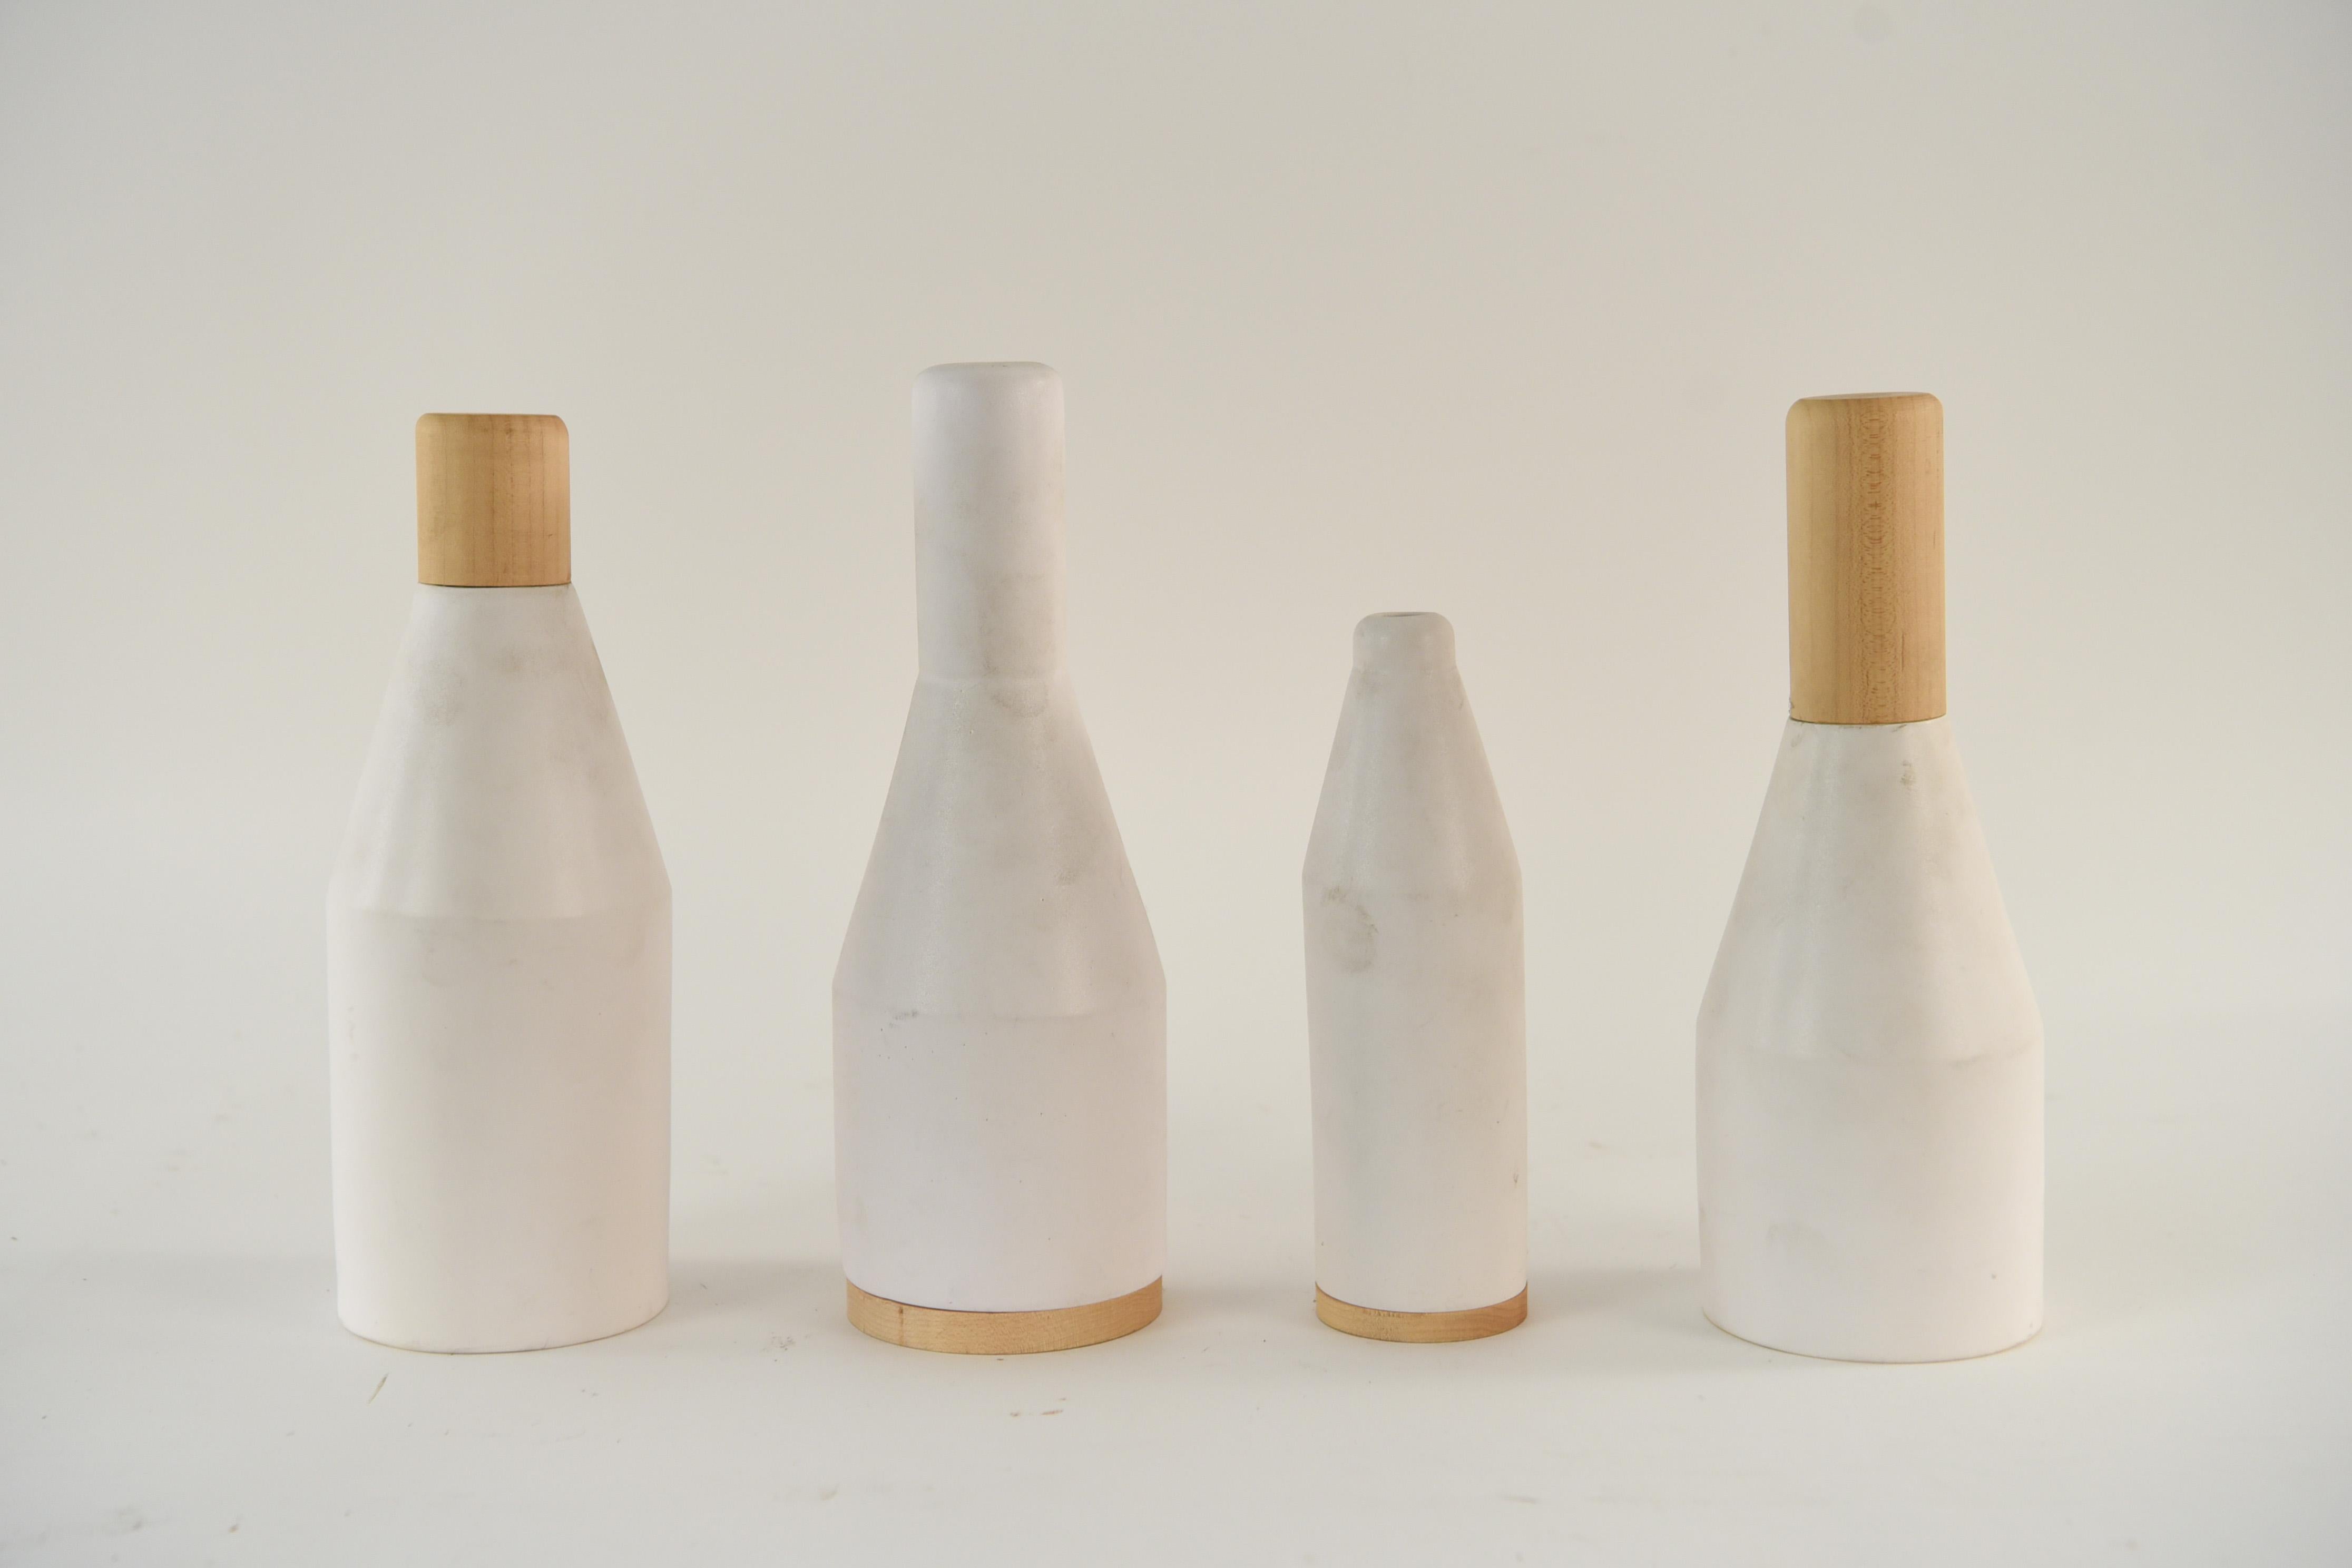 This set of four ceramic decorative items has a clean modern look. Two have holes and can function as vases. Two are closed and for decorative purposes only. Forms and vases mixed with wood. The Forms No Figures collection was inspired by industrial